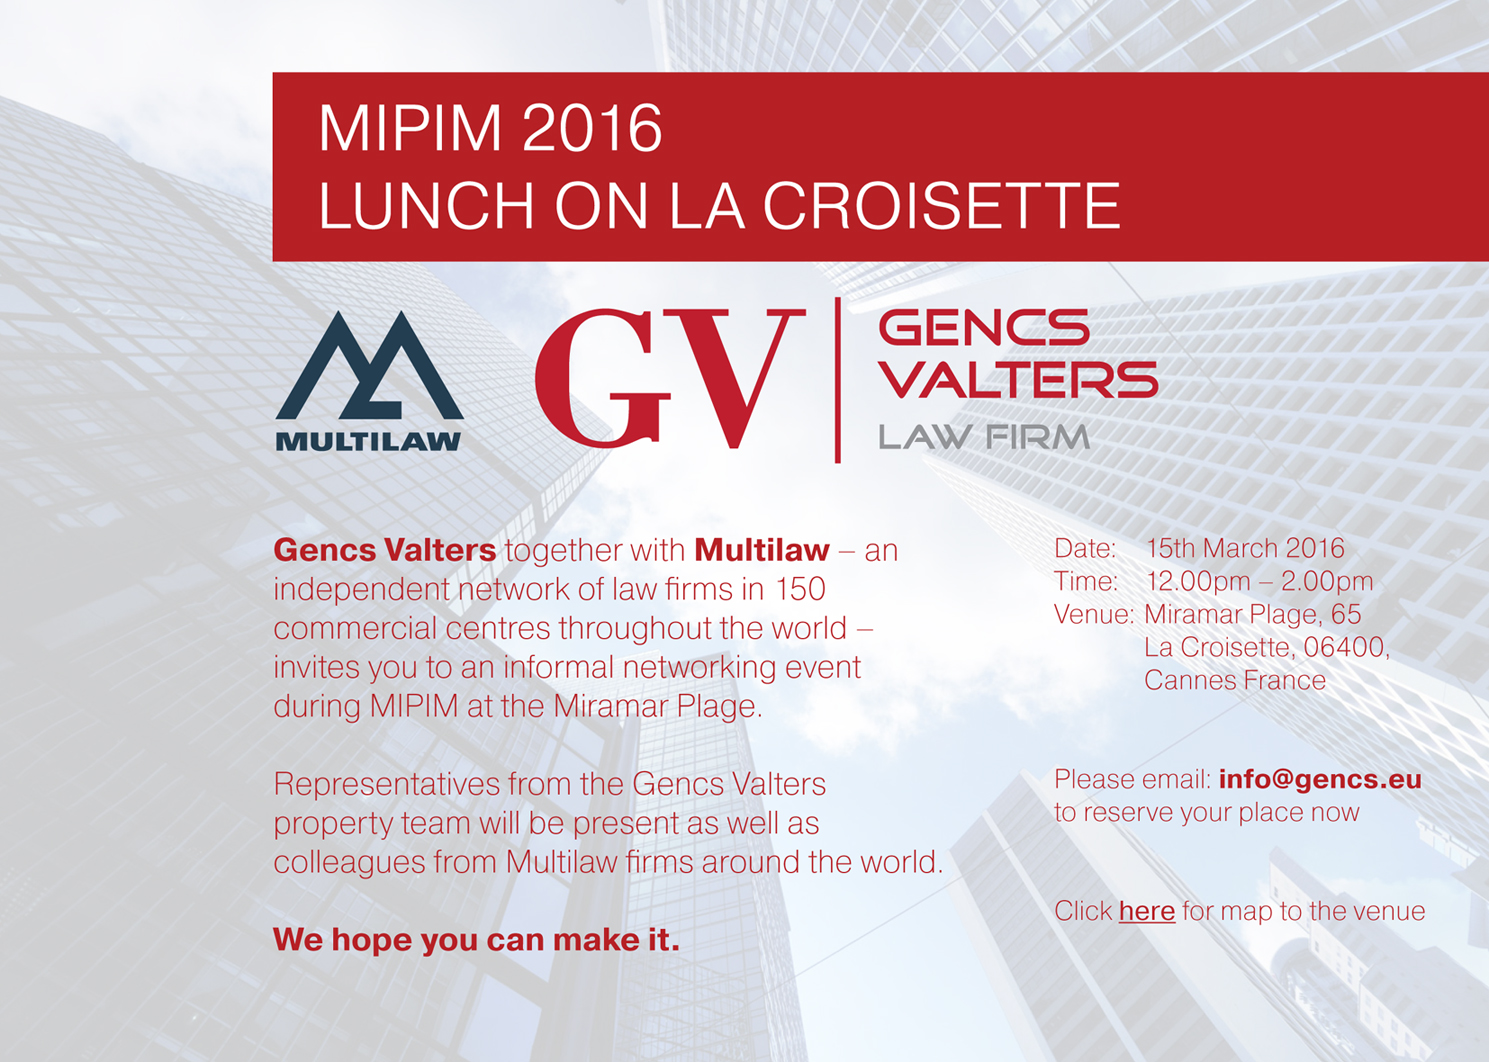 MIPIM invitation, Gencs Valters law firm, lawyer in Latvia